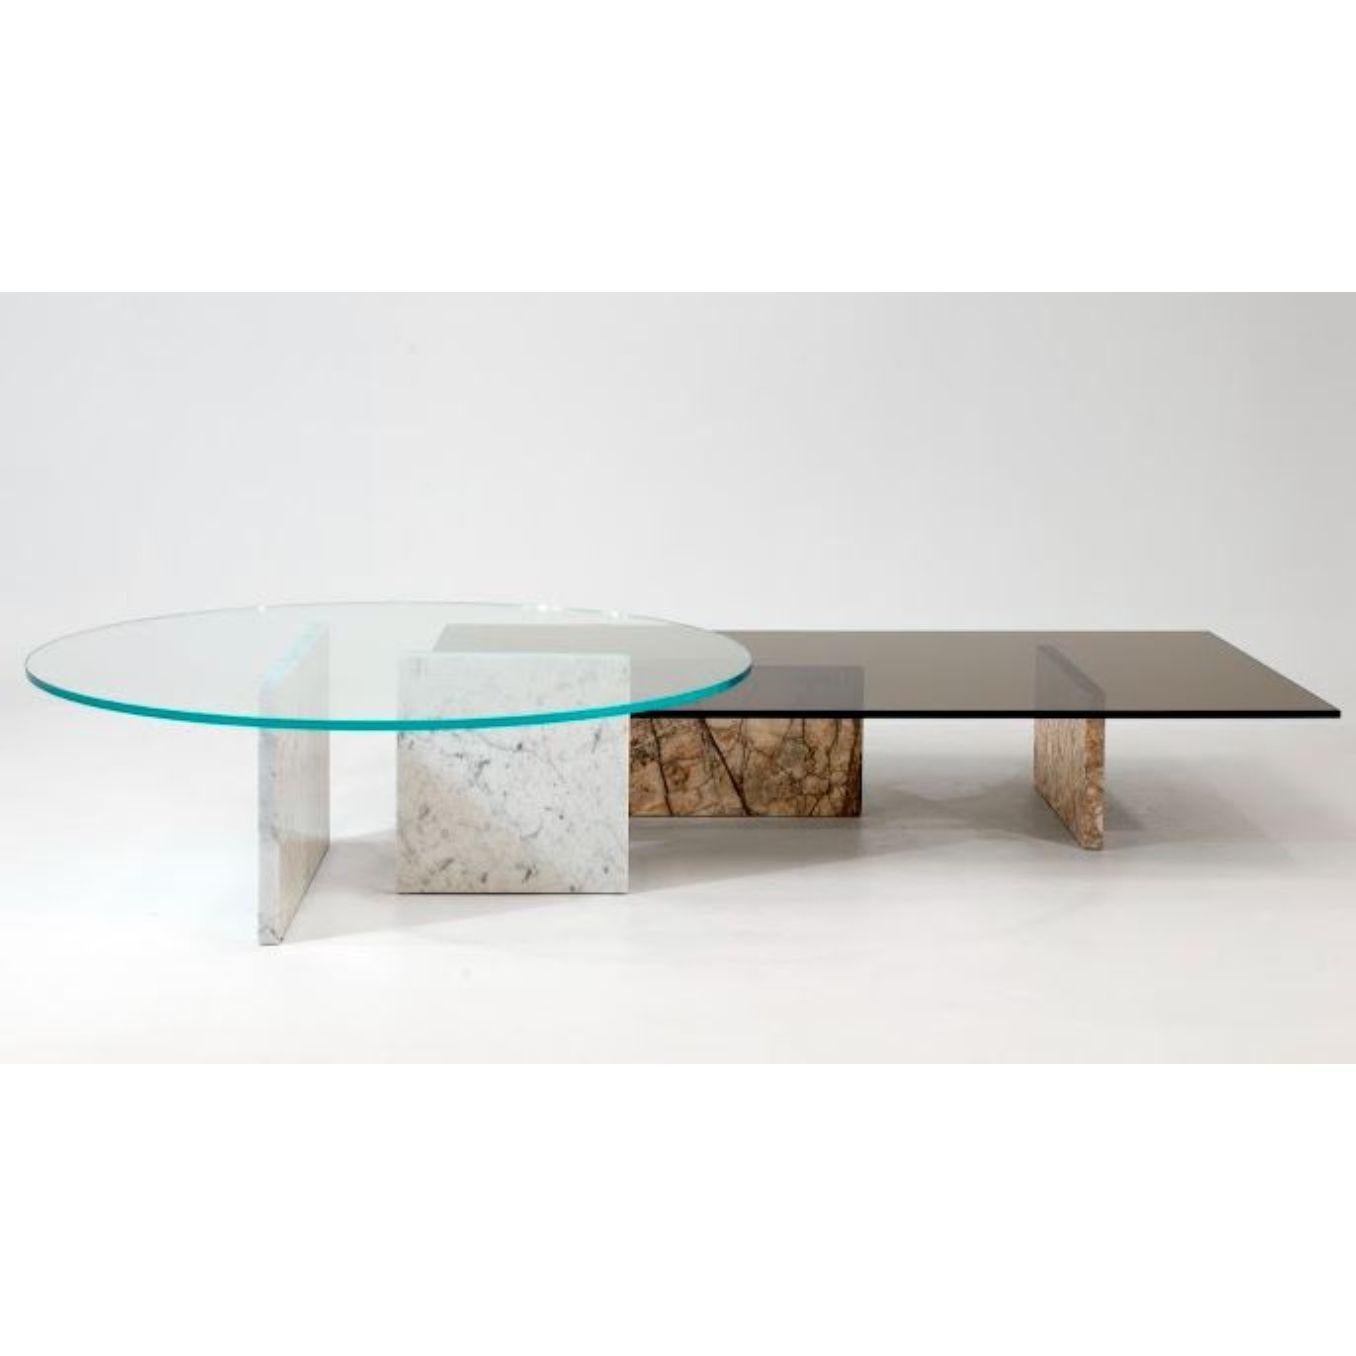 Set of 2 remerber me round coffee table by Claste
Dimensions: D 76.2 x W 137.2 x H 35.5 cm
Material: Carrara Gioia, Belvedere black, Mont Blanc, Manhatten Calacatta, Fusion marble, temptation Marble, blue Mare 
Weight: 119 kg

Since 2017